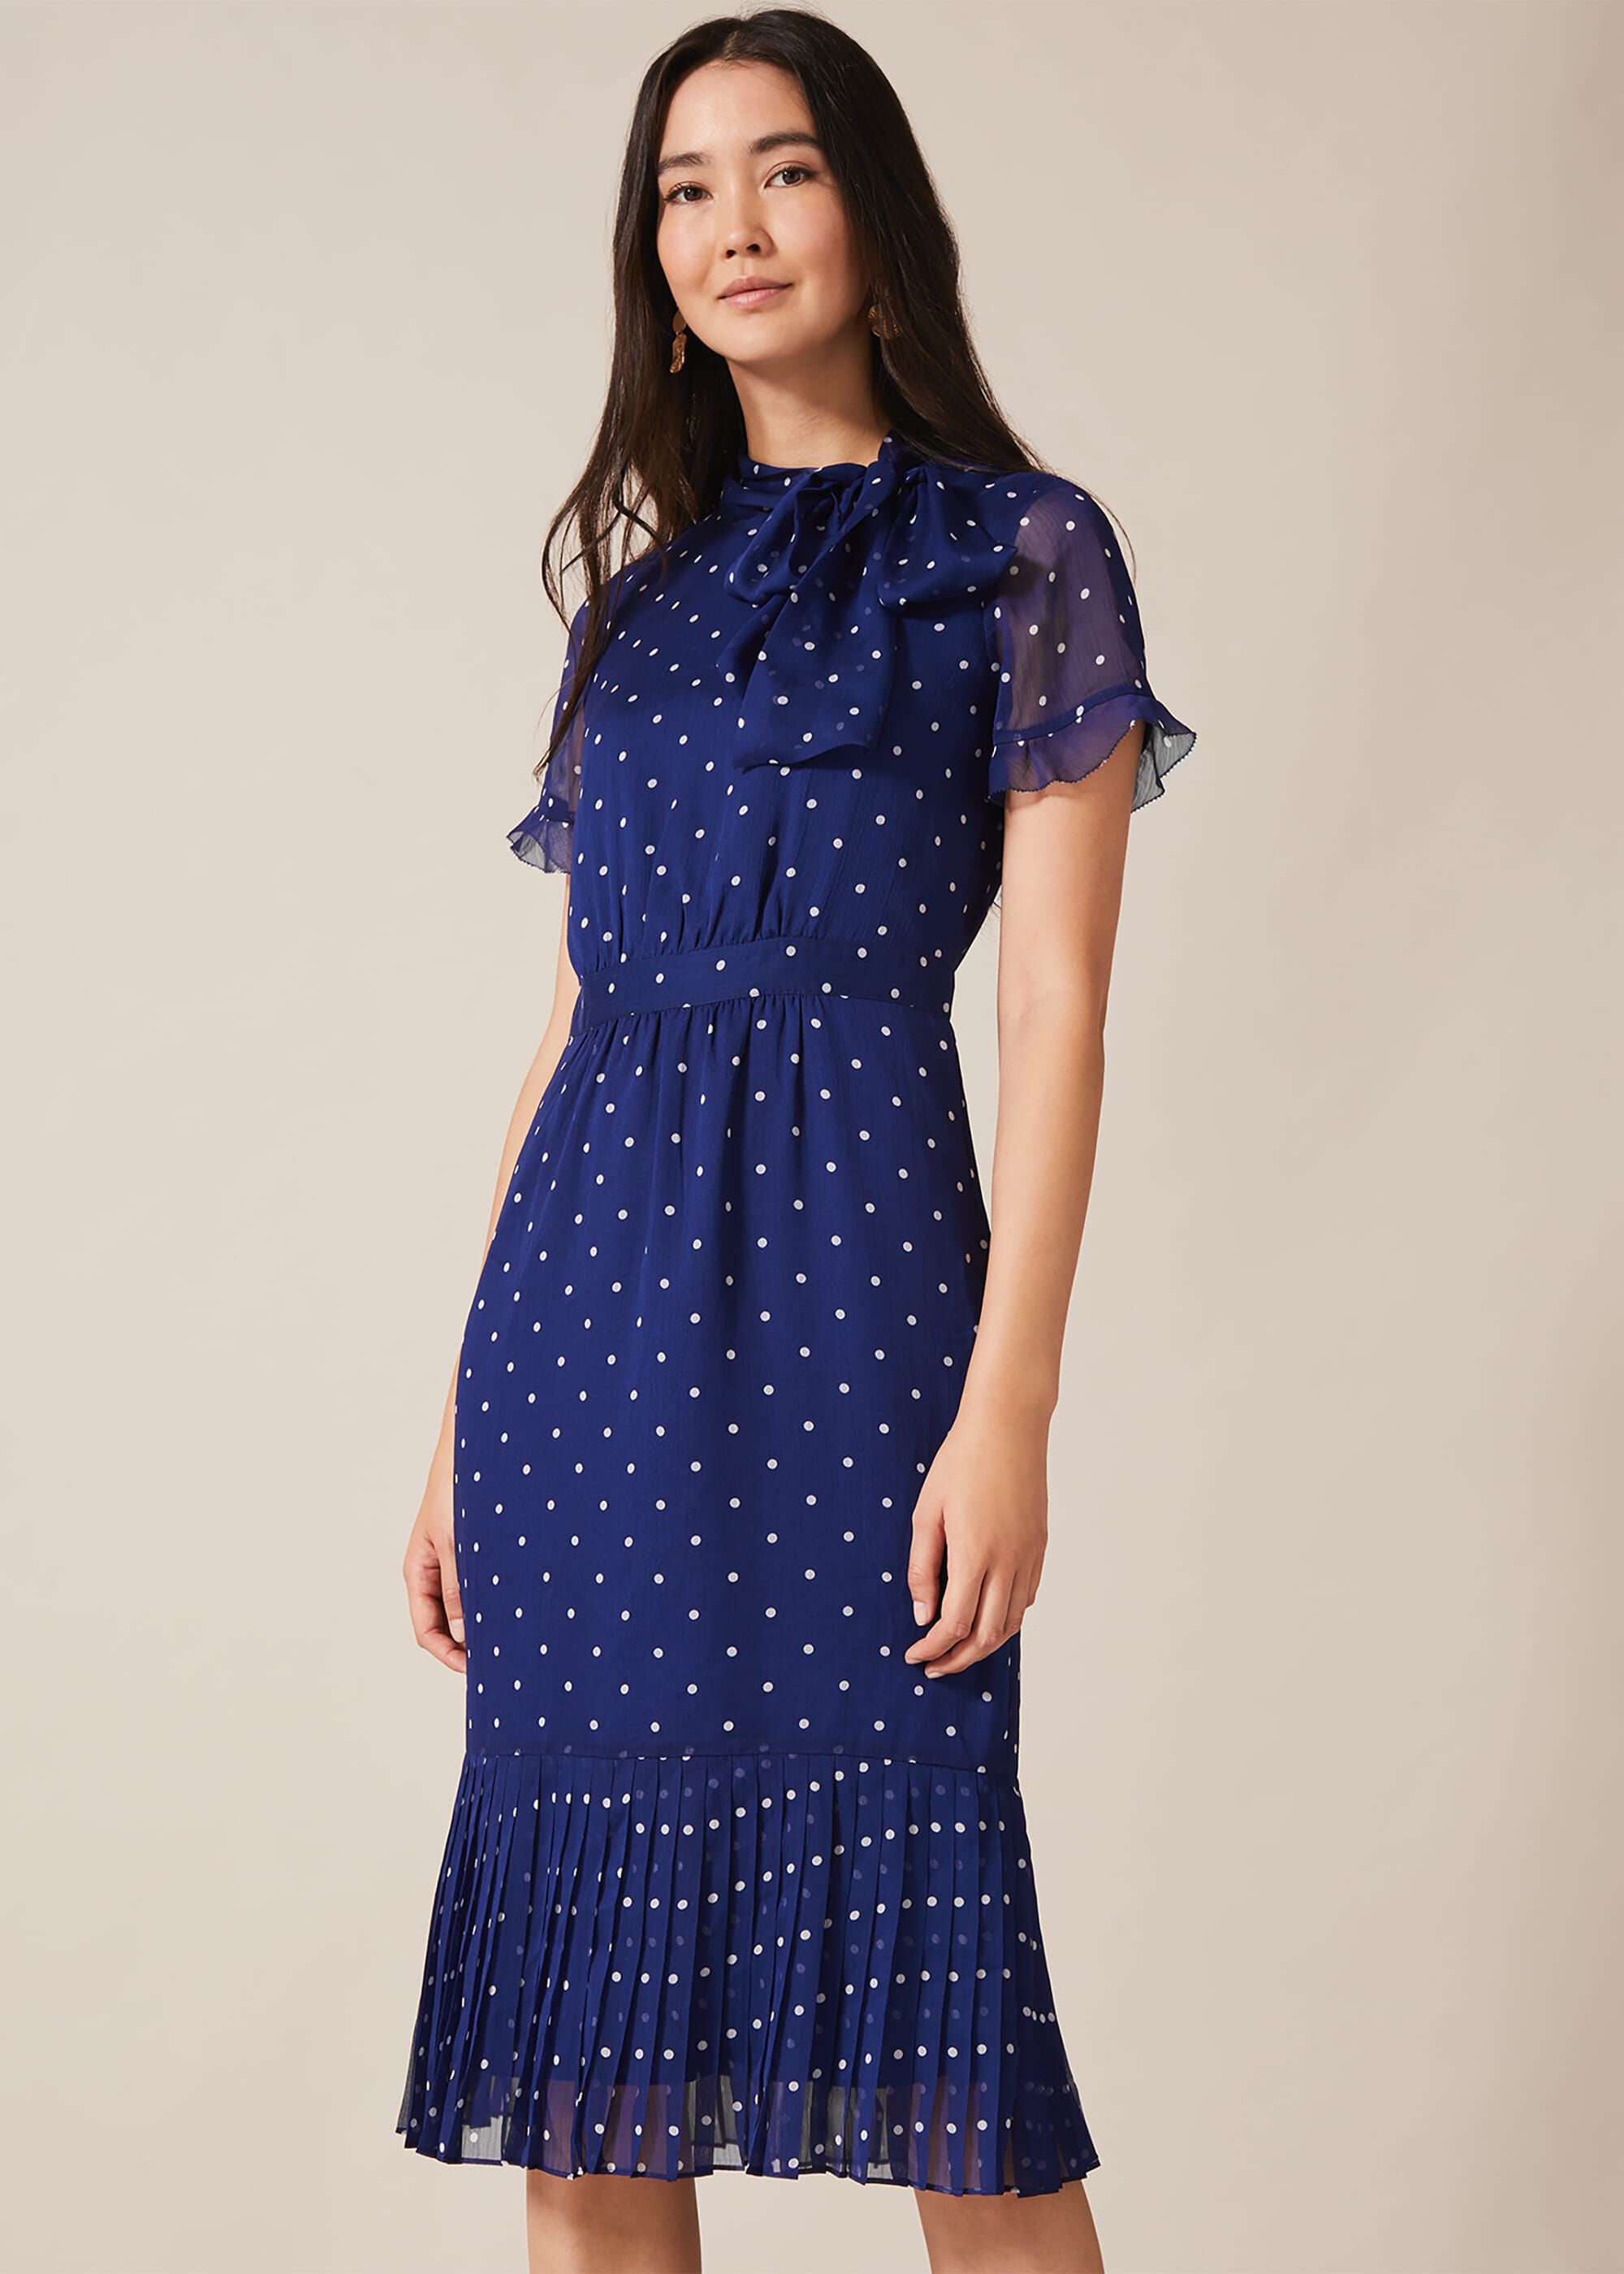 Phase Eight Dresses Top Sellers, 58% OFF | atheneainstitute.com